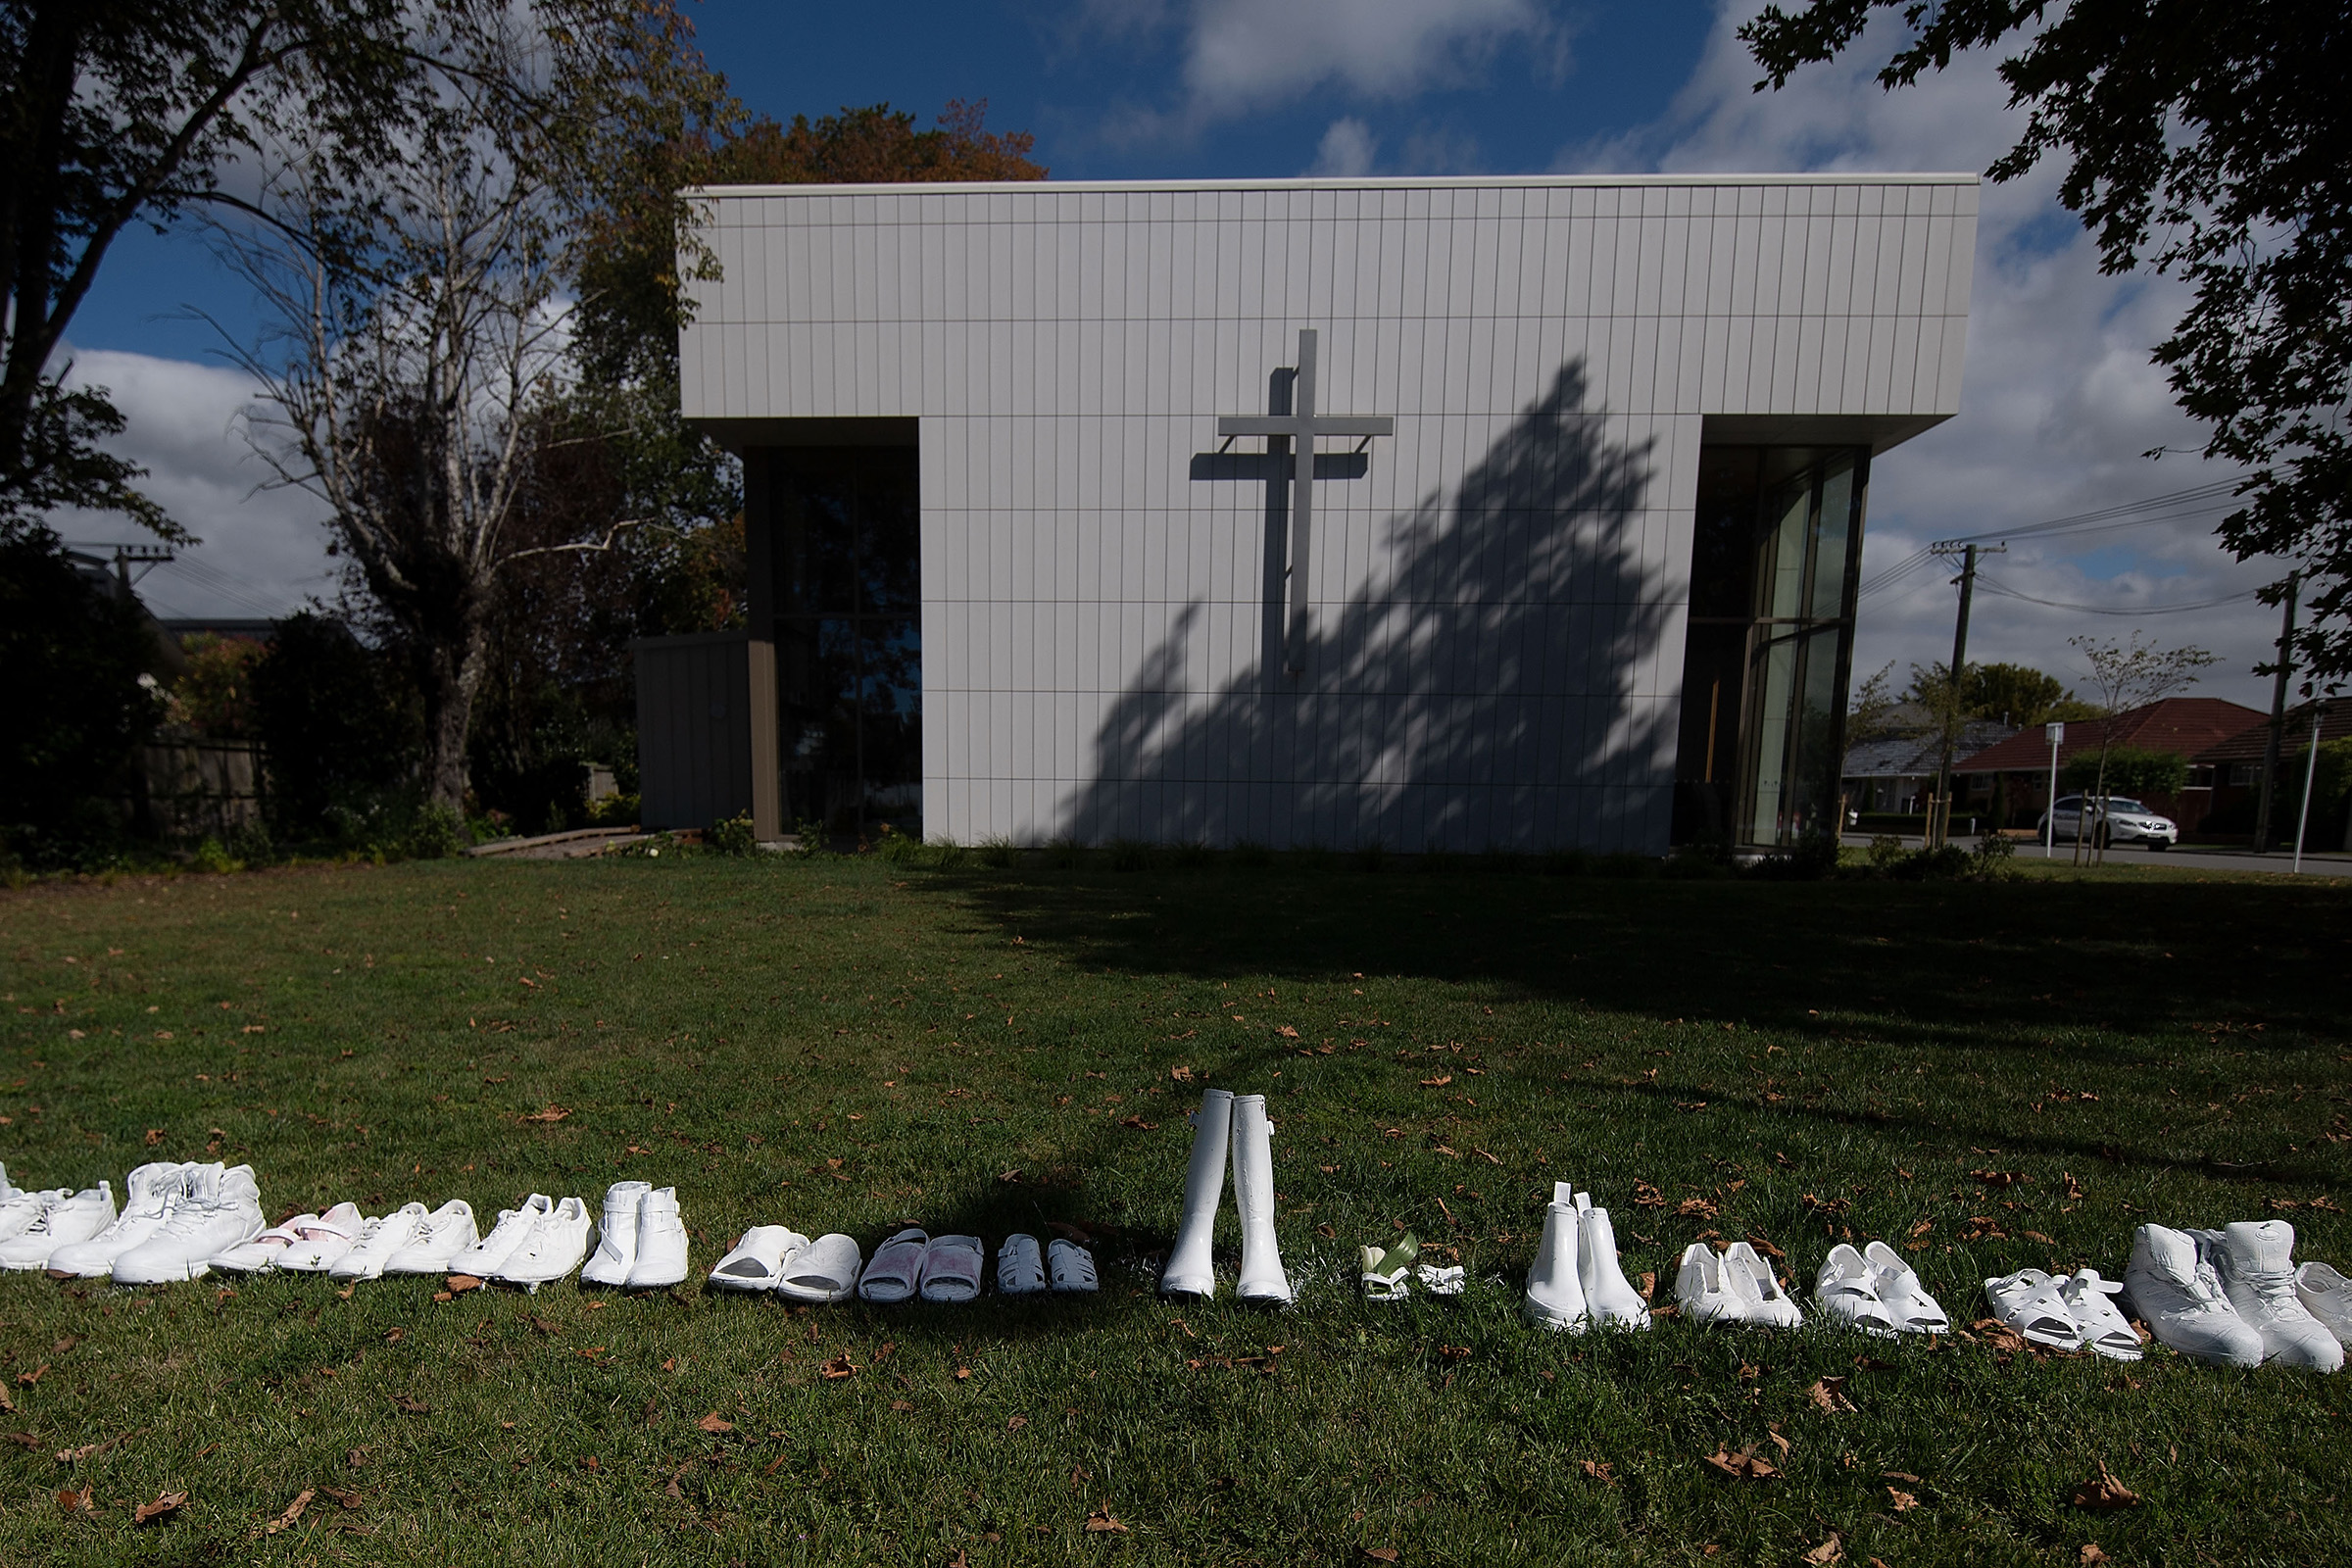 Fifty pairs of shoes lay outside the All Souls Church representing the 50 people gunned down at the two mosques in Christchurch on March 19, 2019. (Marty Melville—AFP/Getty Images.)